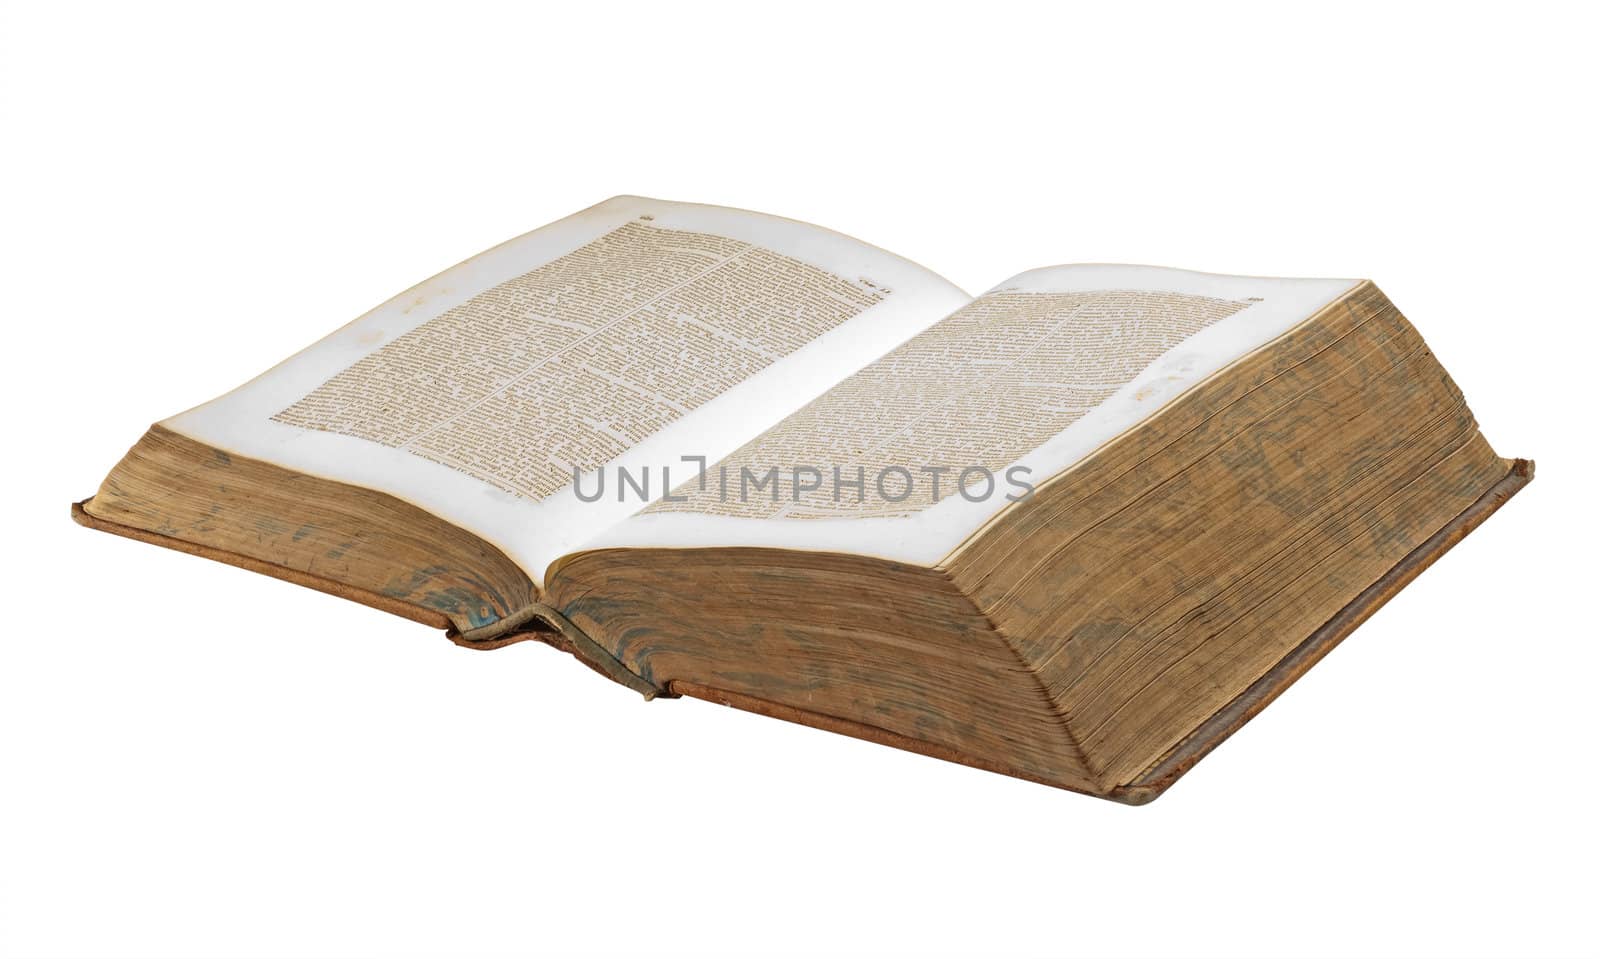 Antique open book, isolated on white